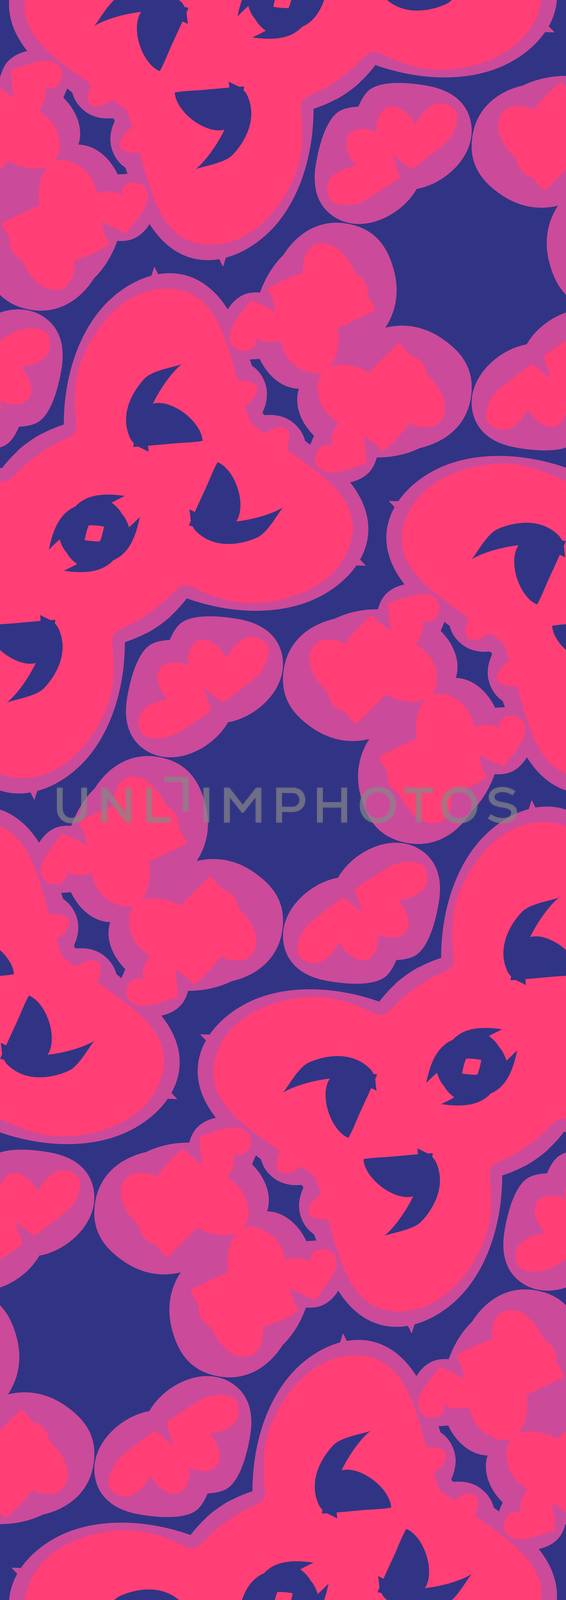 Random pink and purple shapes in repeating blue background pattern